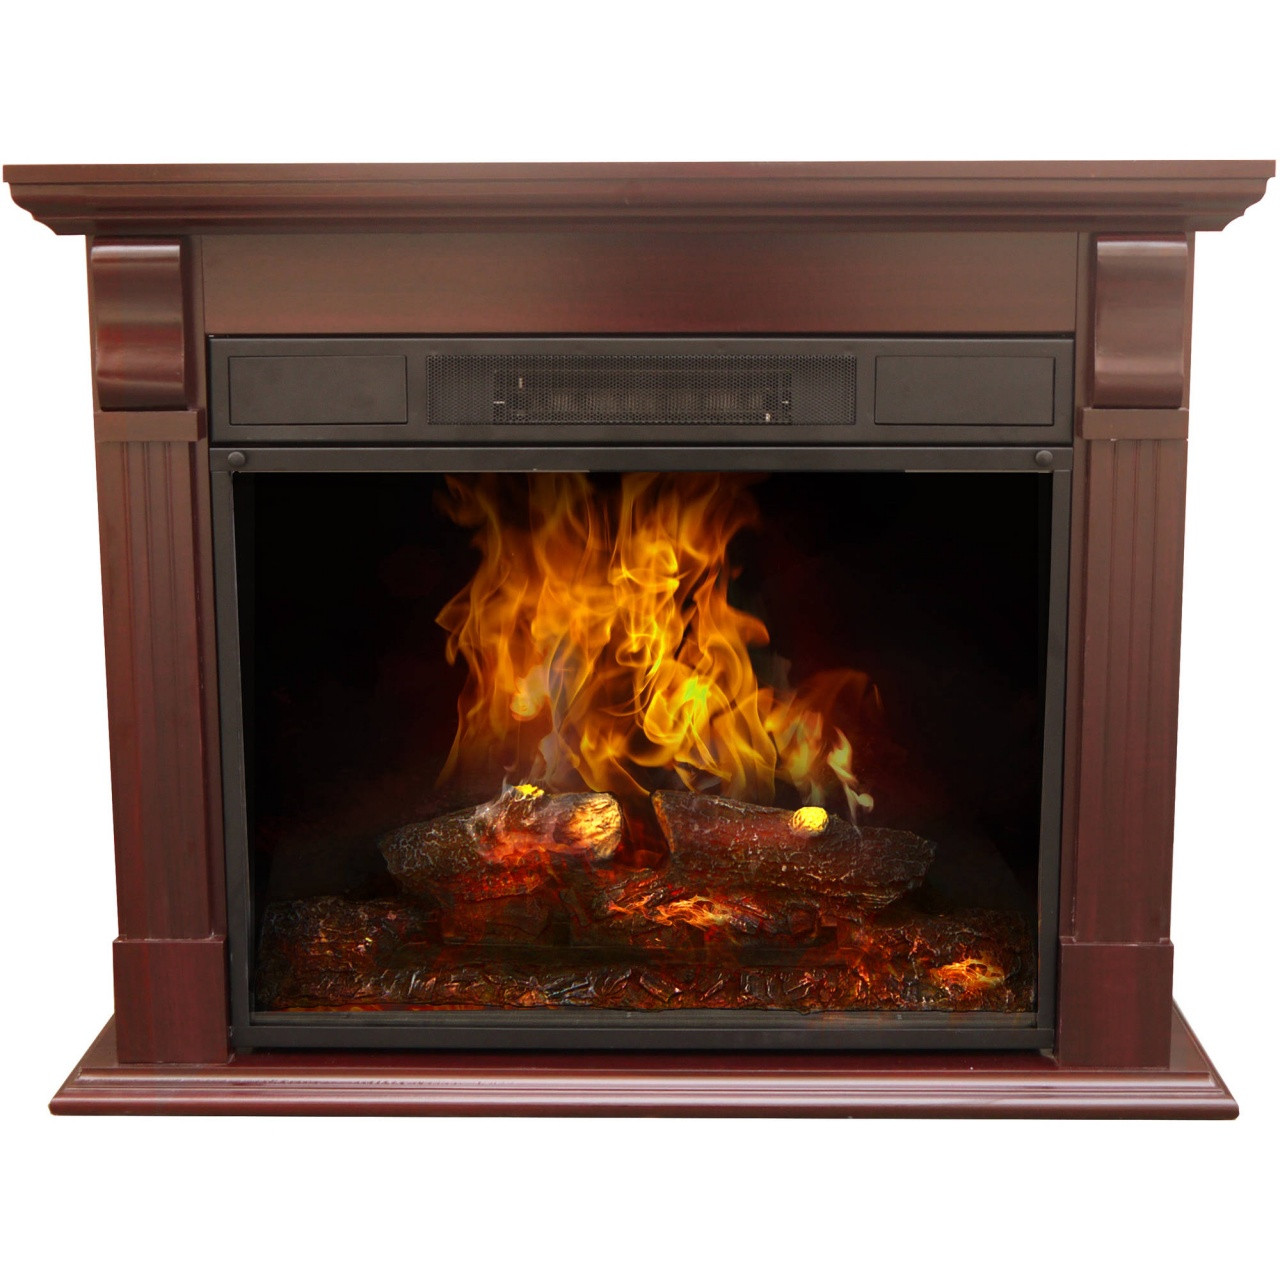 Ember Hearth Electric Fireplace Costco
 Ember Hearth Electric Fireplace Costco – FIREPLACE IDEAS